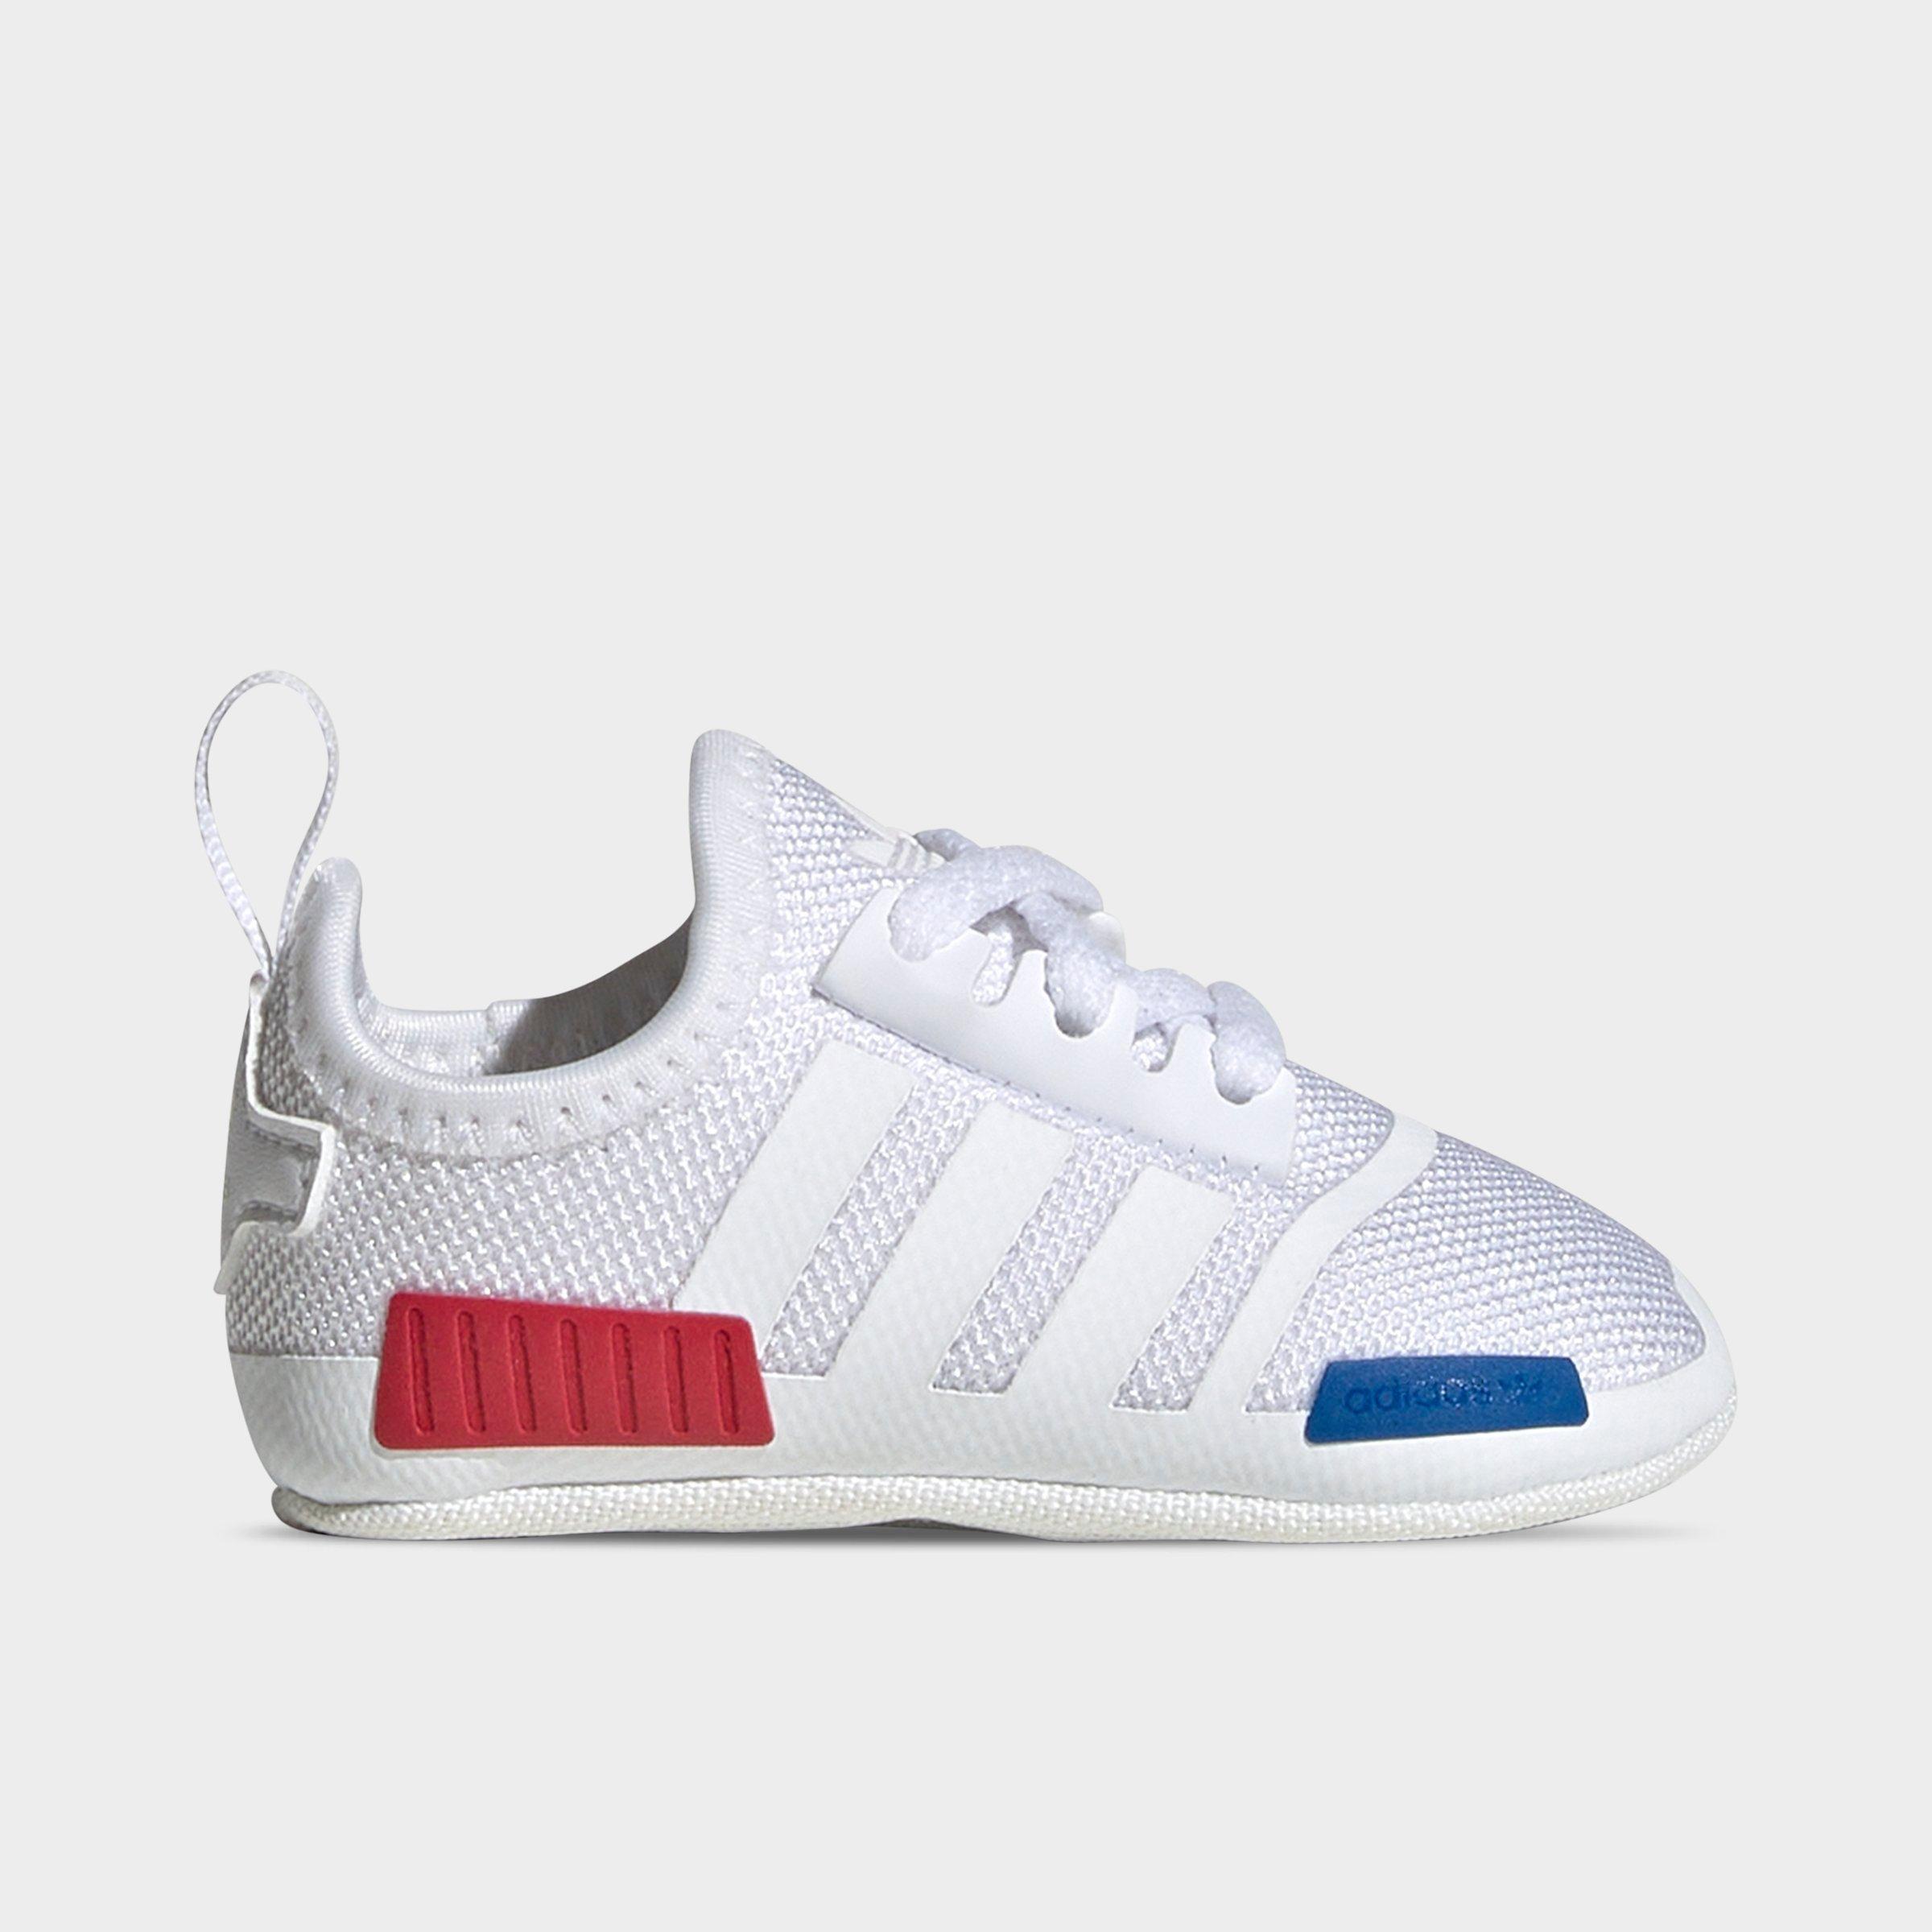 adidas NMD Shoes, NMD_S1, NMD_R1